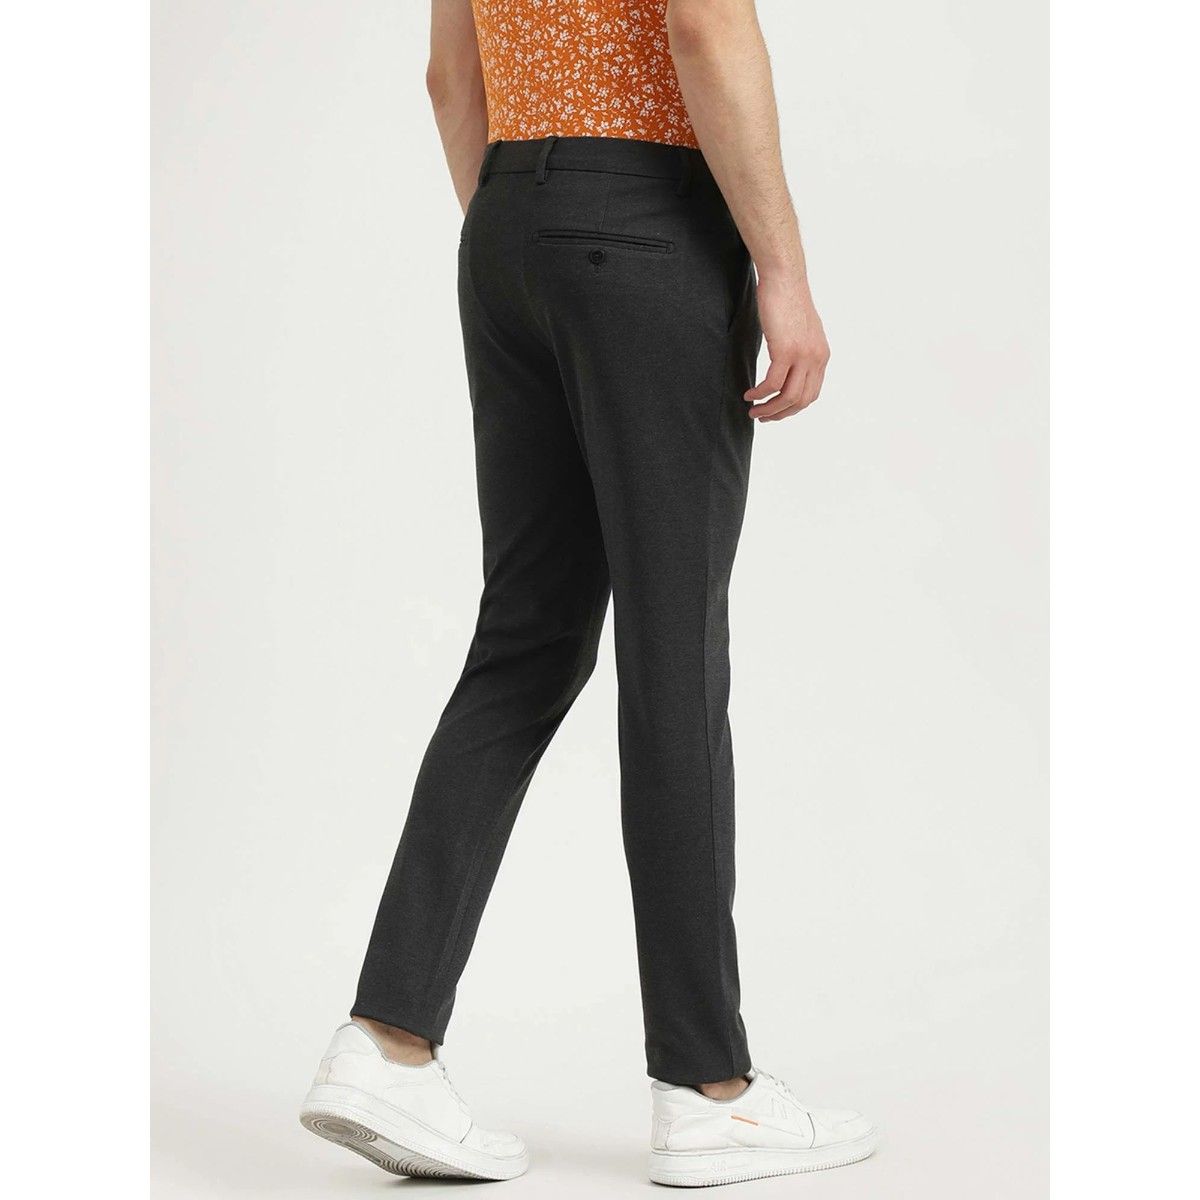 Buy United Colors of Benetton Beige Slim Tapered Fit Trousers from top  Brands at Best Prices Online in India  Tata CLiQ